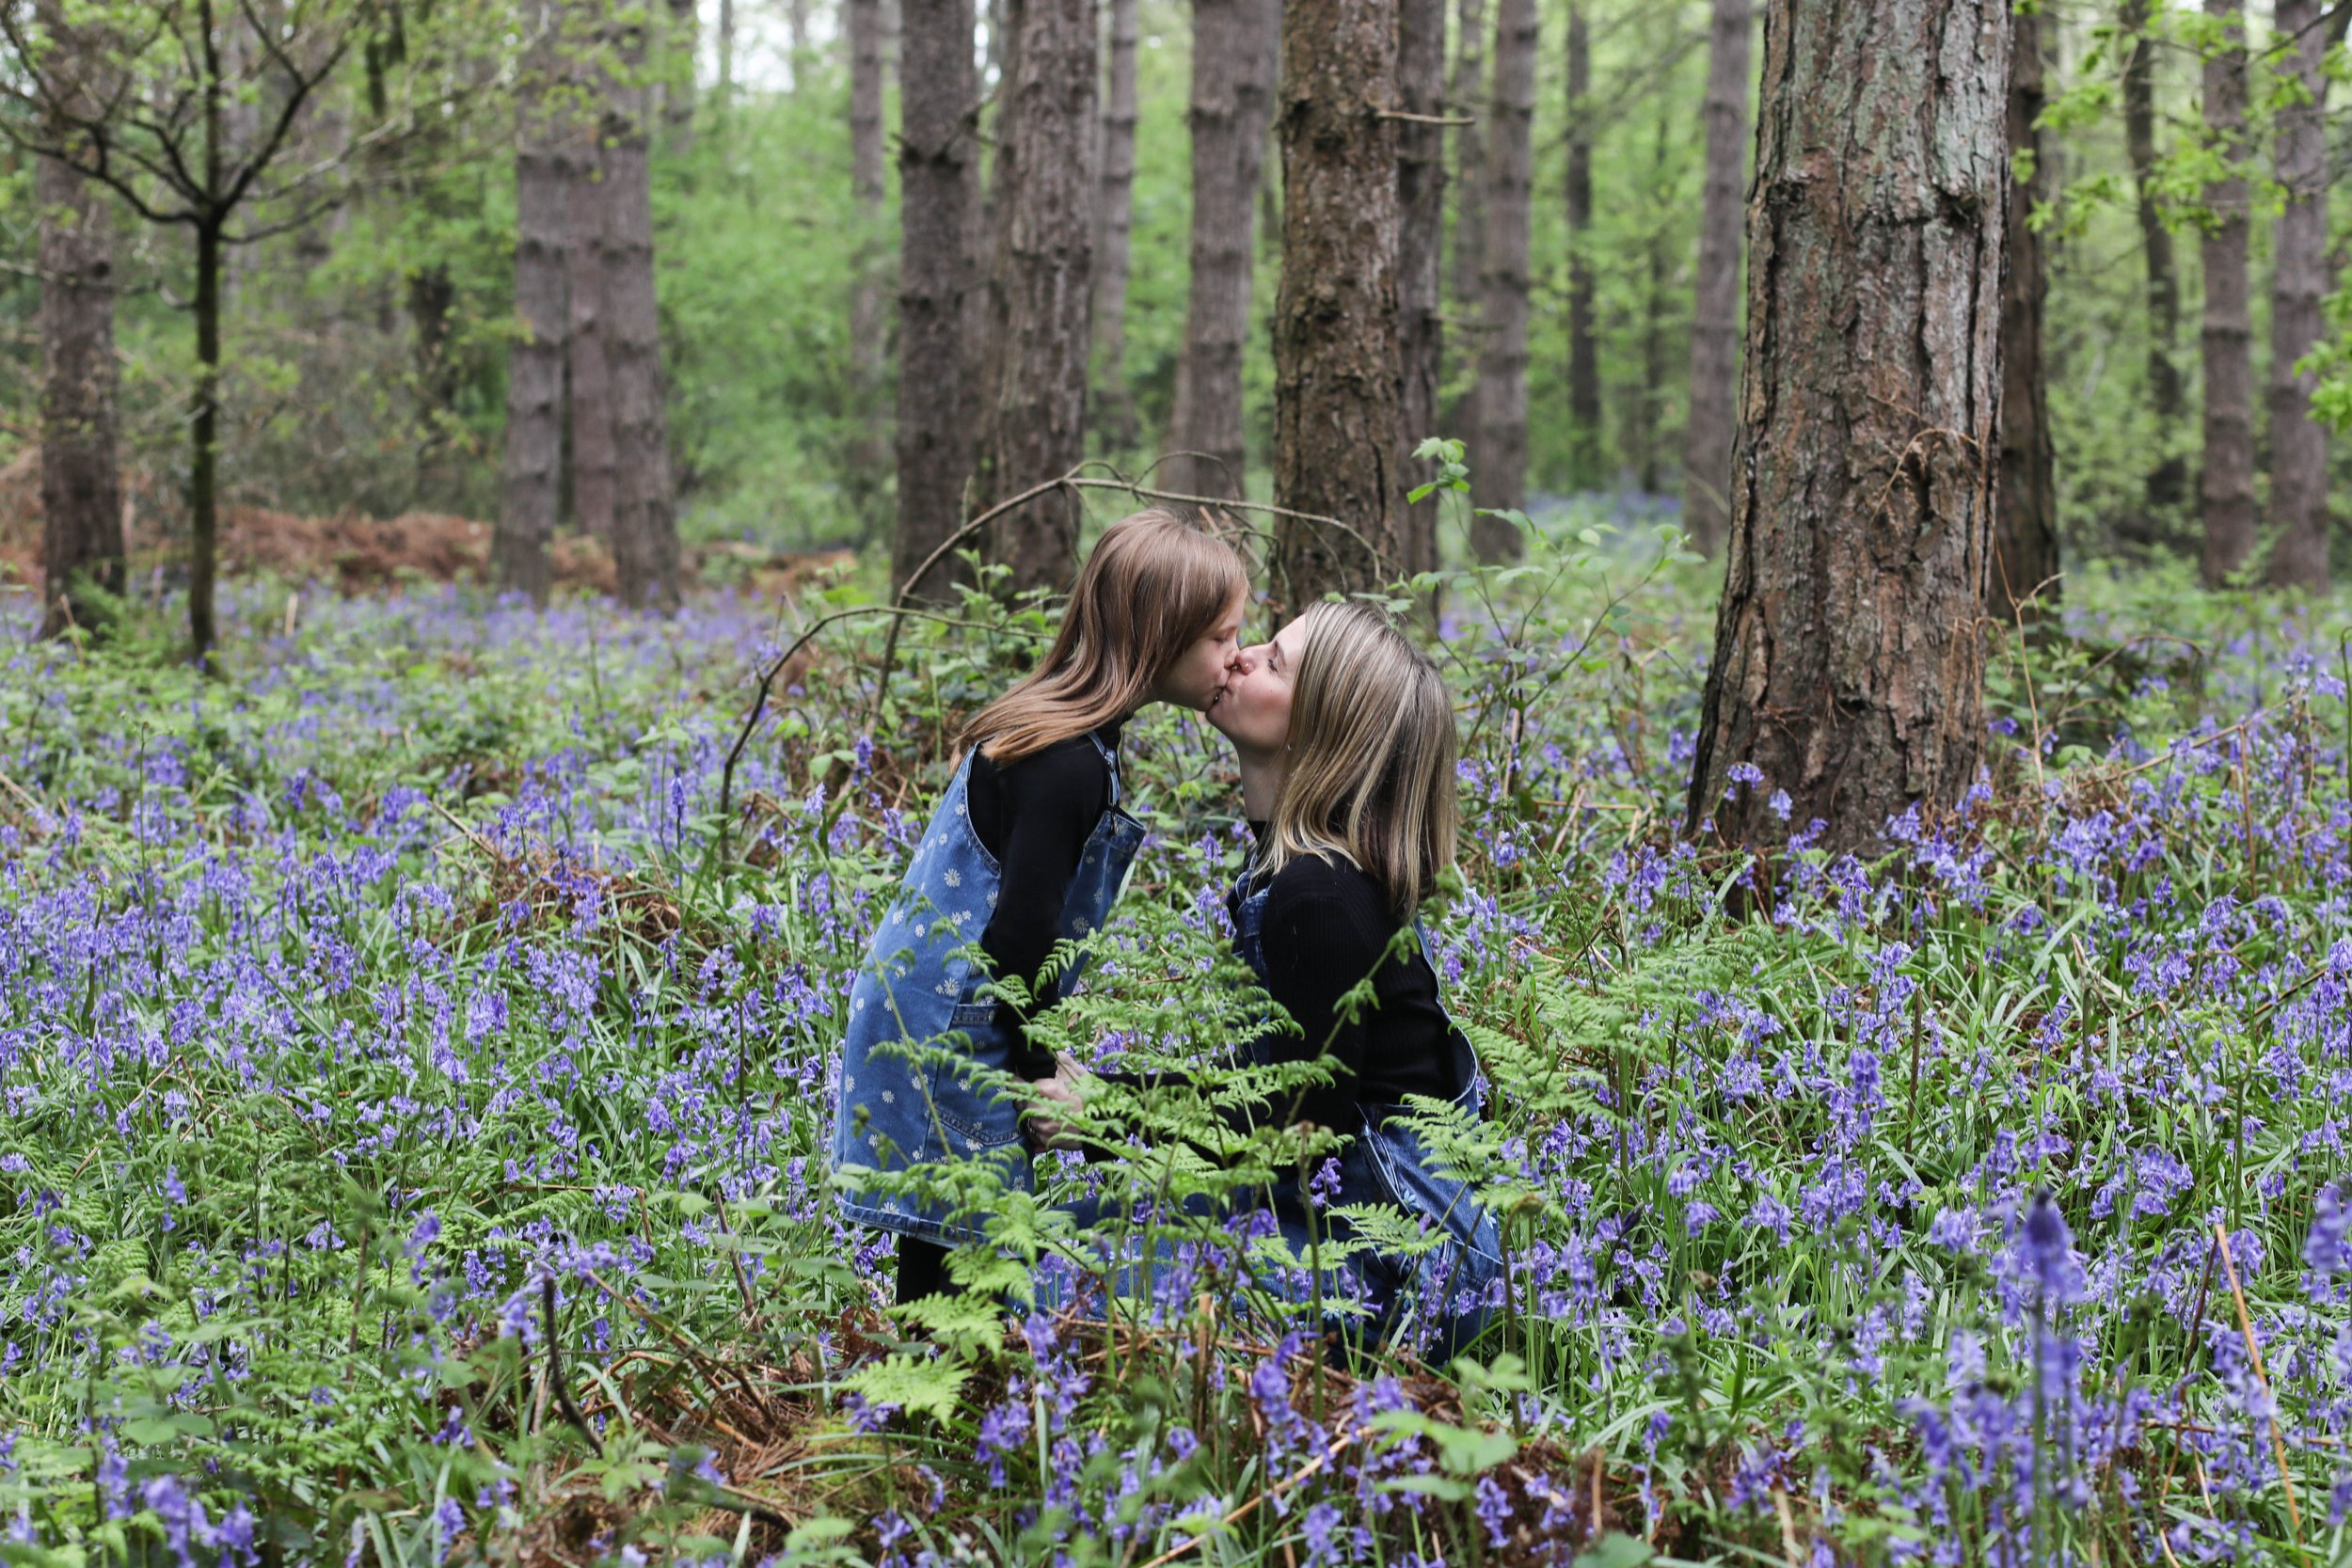 MUM AND DAUGHTER PHOTO SHOOT IN THE BLUEBELLS | BERKSHIRE PORTRAIT SHOOTS33 choice .JPG